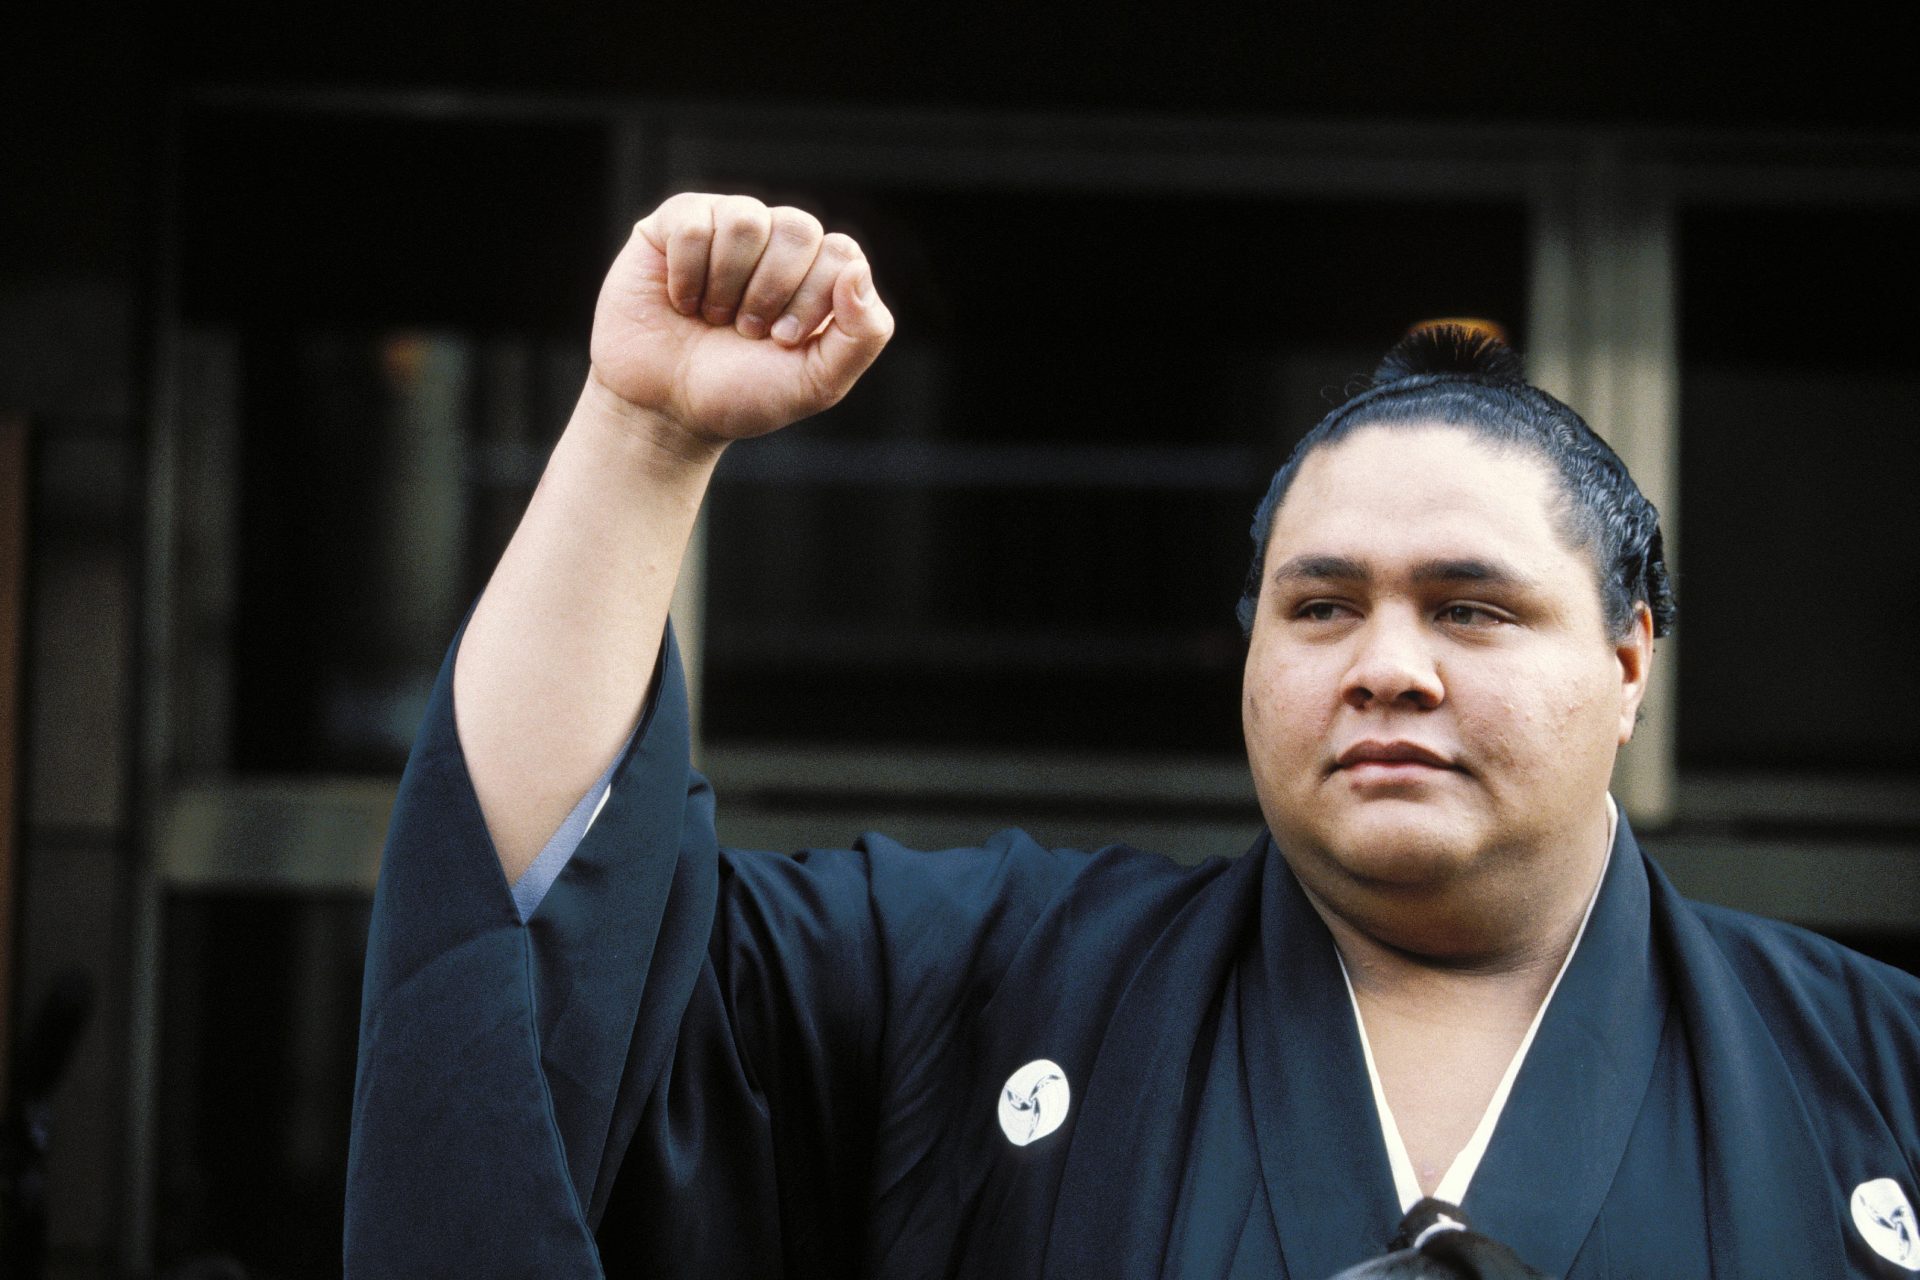 Sumo world shocked by death of 54-year-old champion Akebono Taro